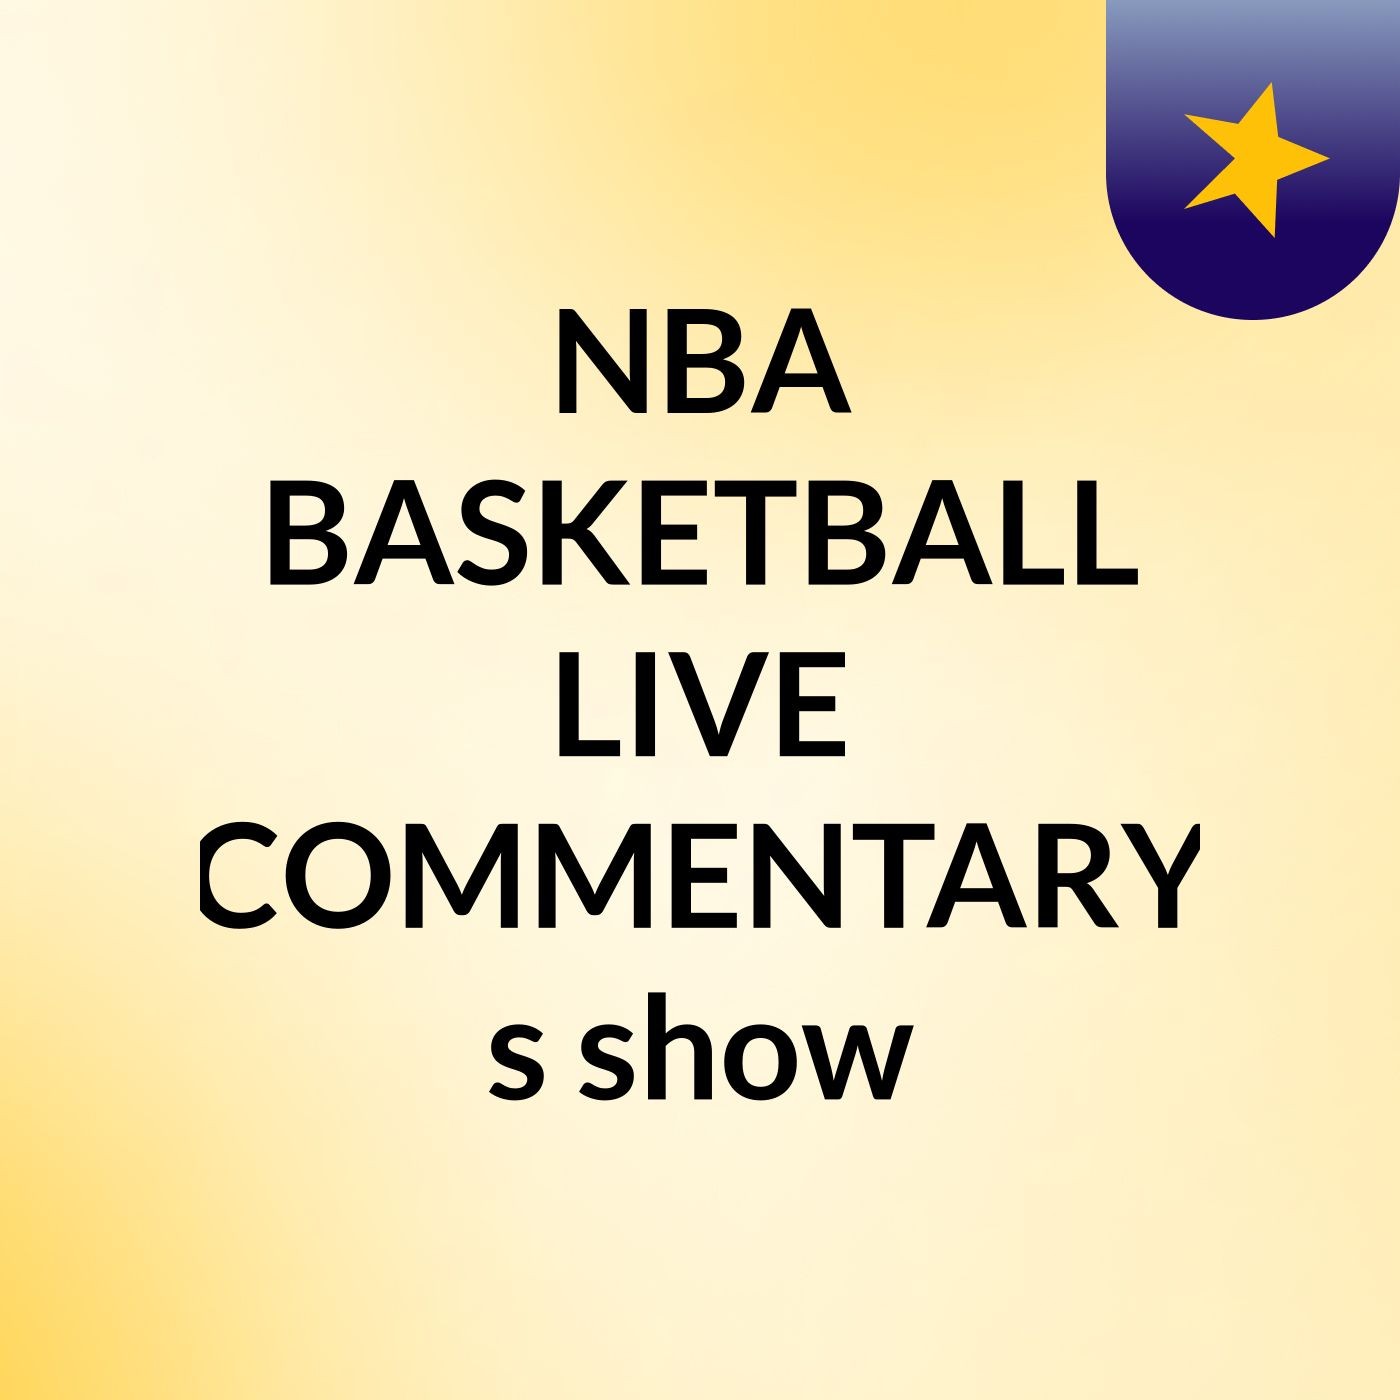 PELICANS VS JAZZ LIVE COMMENTARY